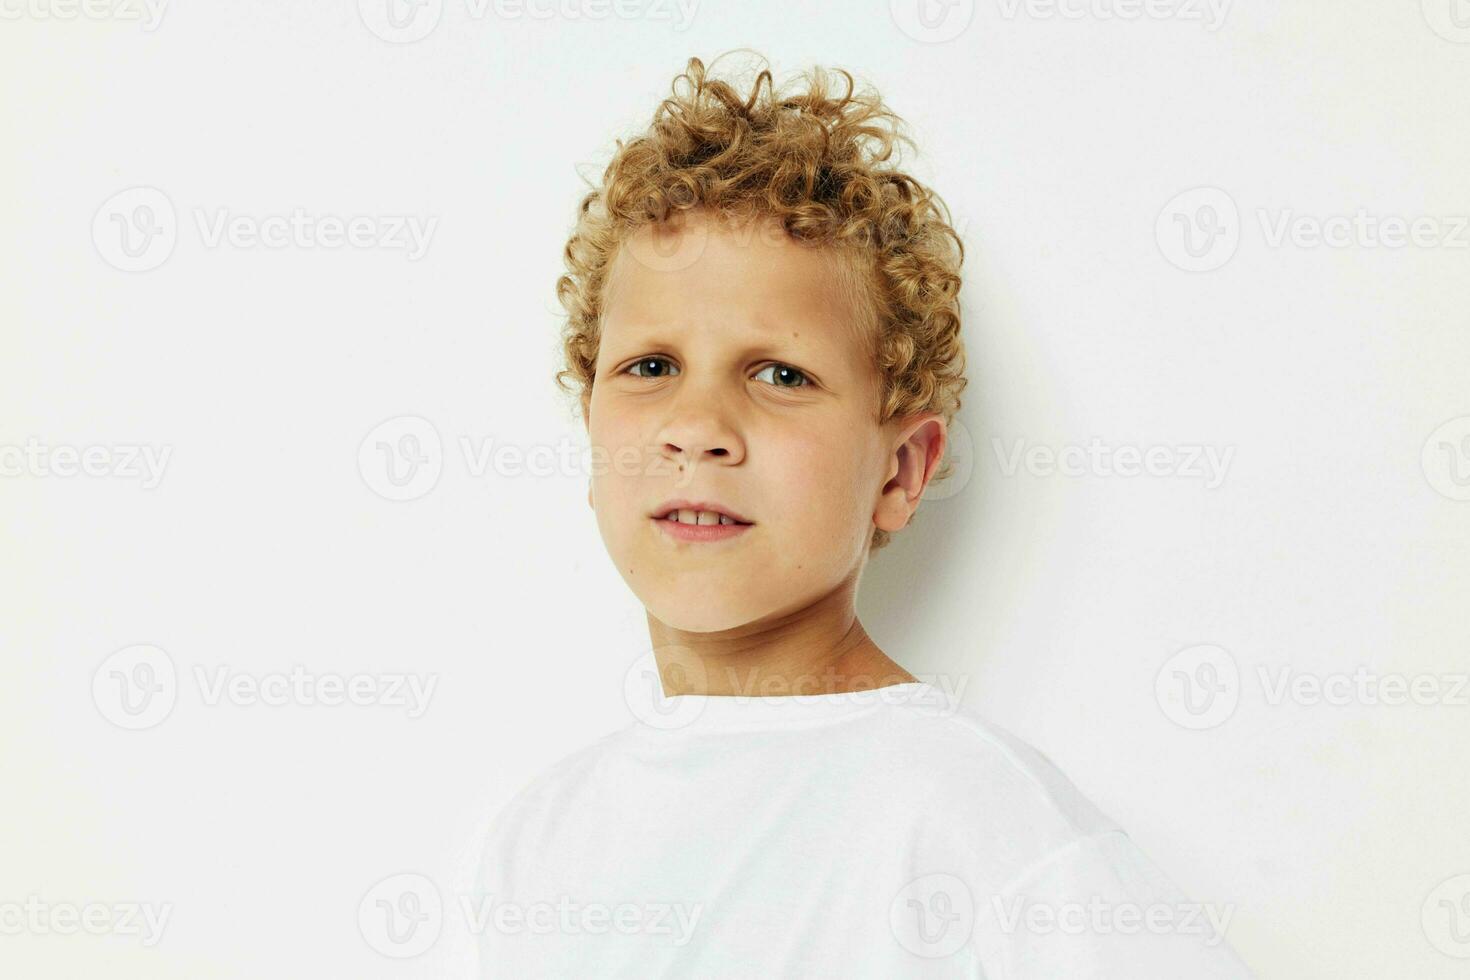 emotional boy with curly hair in a white t-shirt close up photo